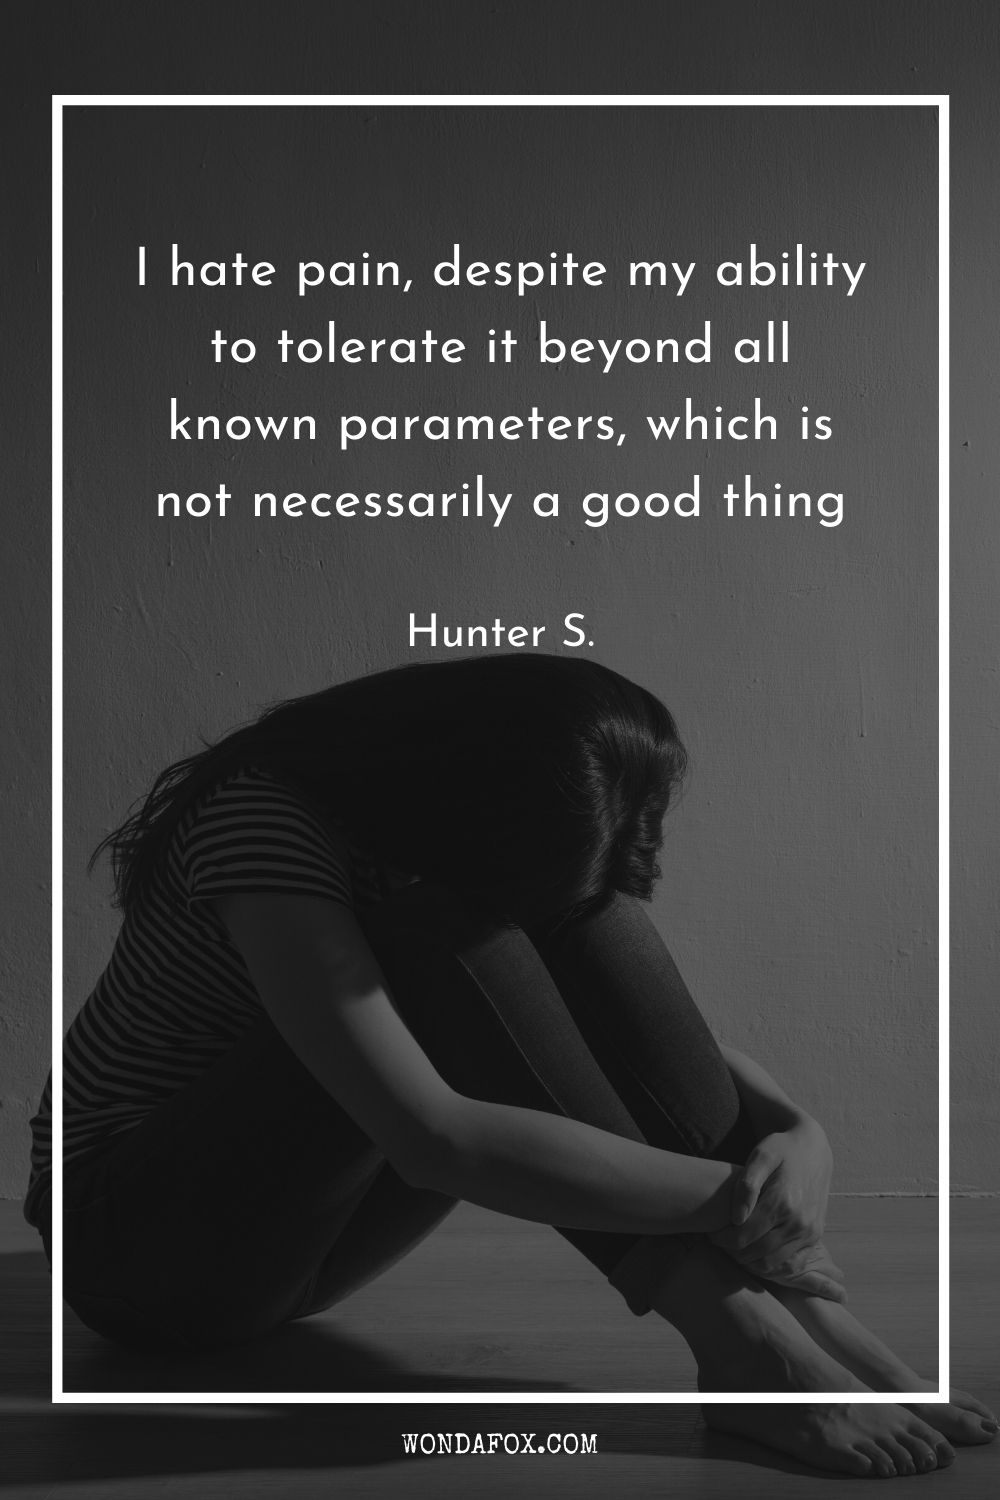 I hate pain, despite my ability to tolerate it beyond all known parameters, which is not necessarily a good thing